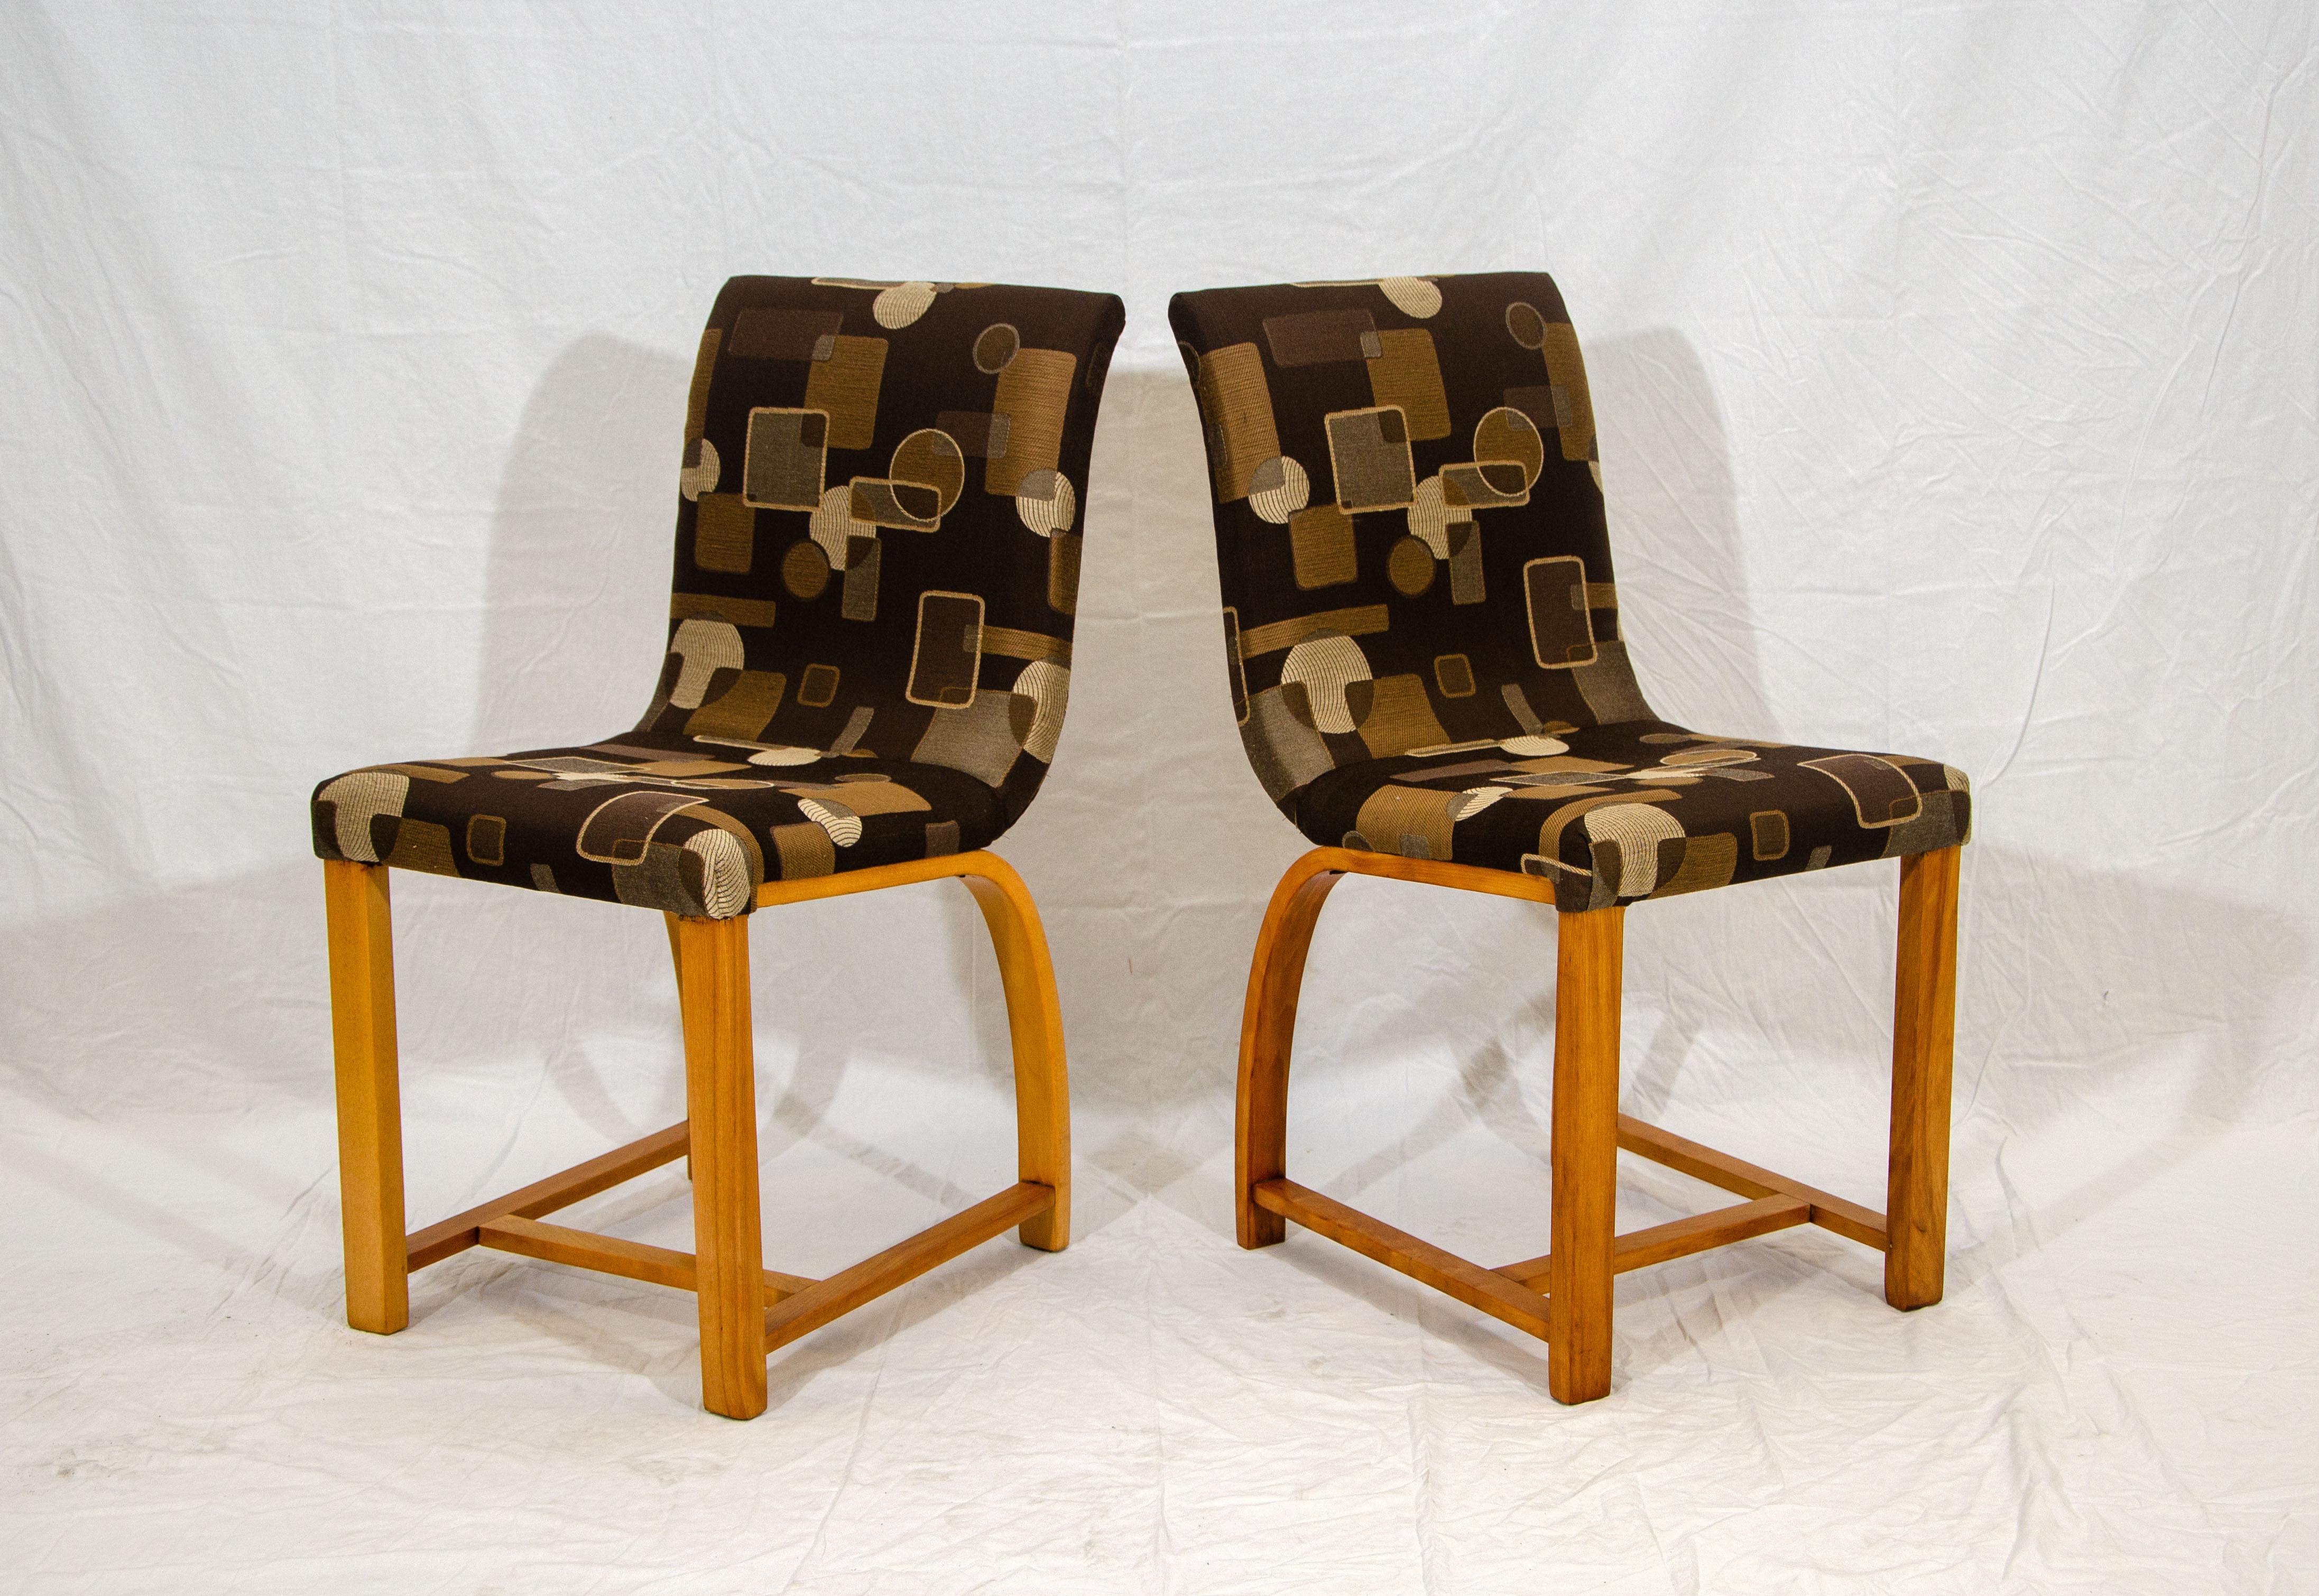 Art Deco Set of Four Dining Chairs, Gilbert Rohde for Heywood Wakefield